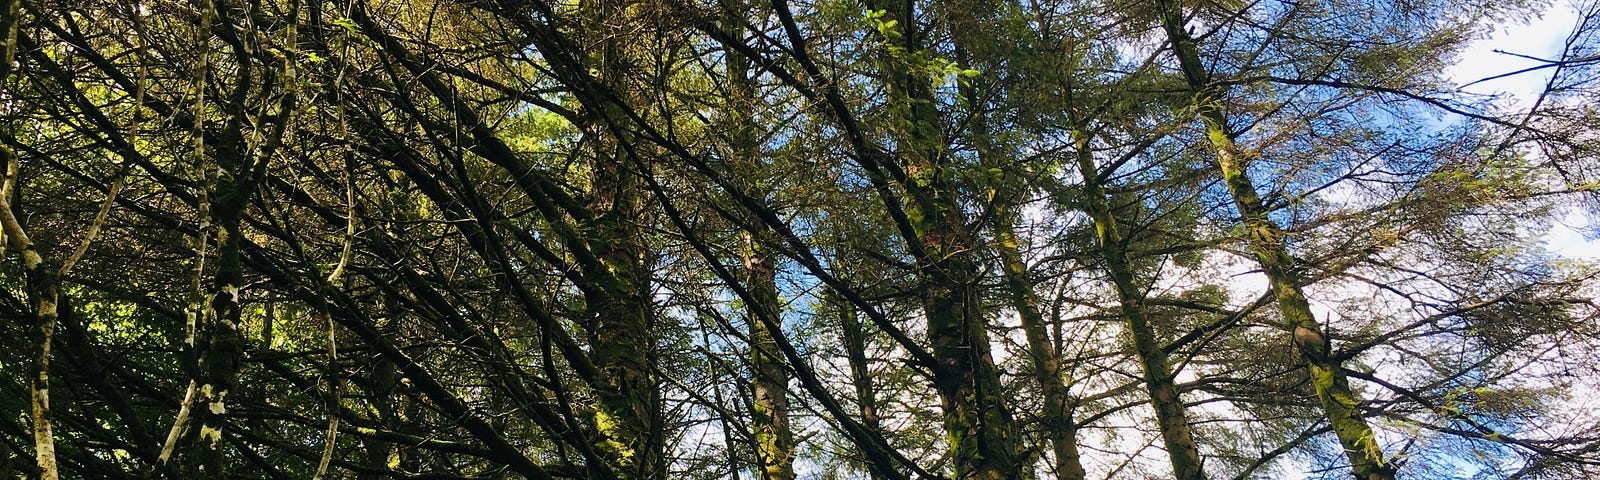 Looking up at the sky through a forest of trees.